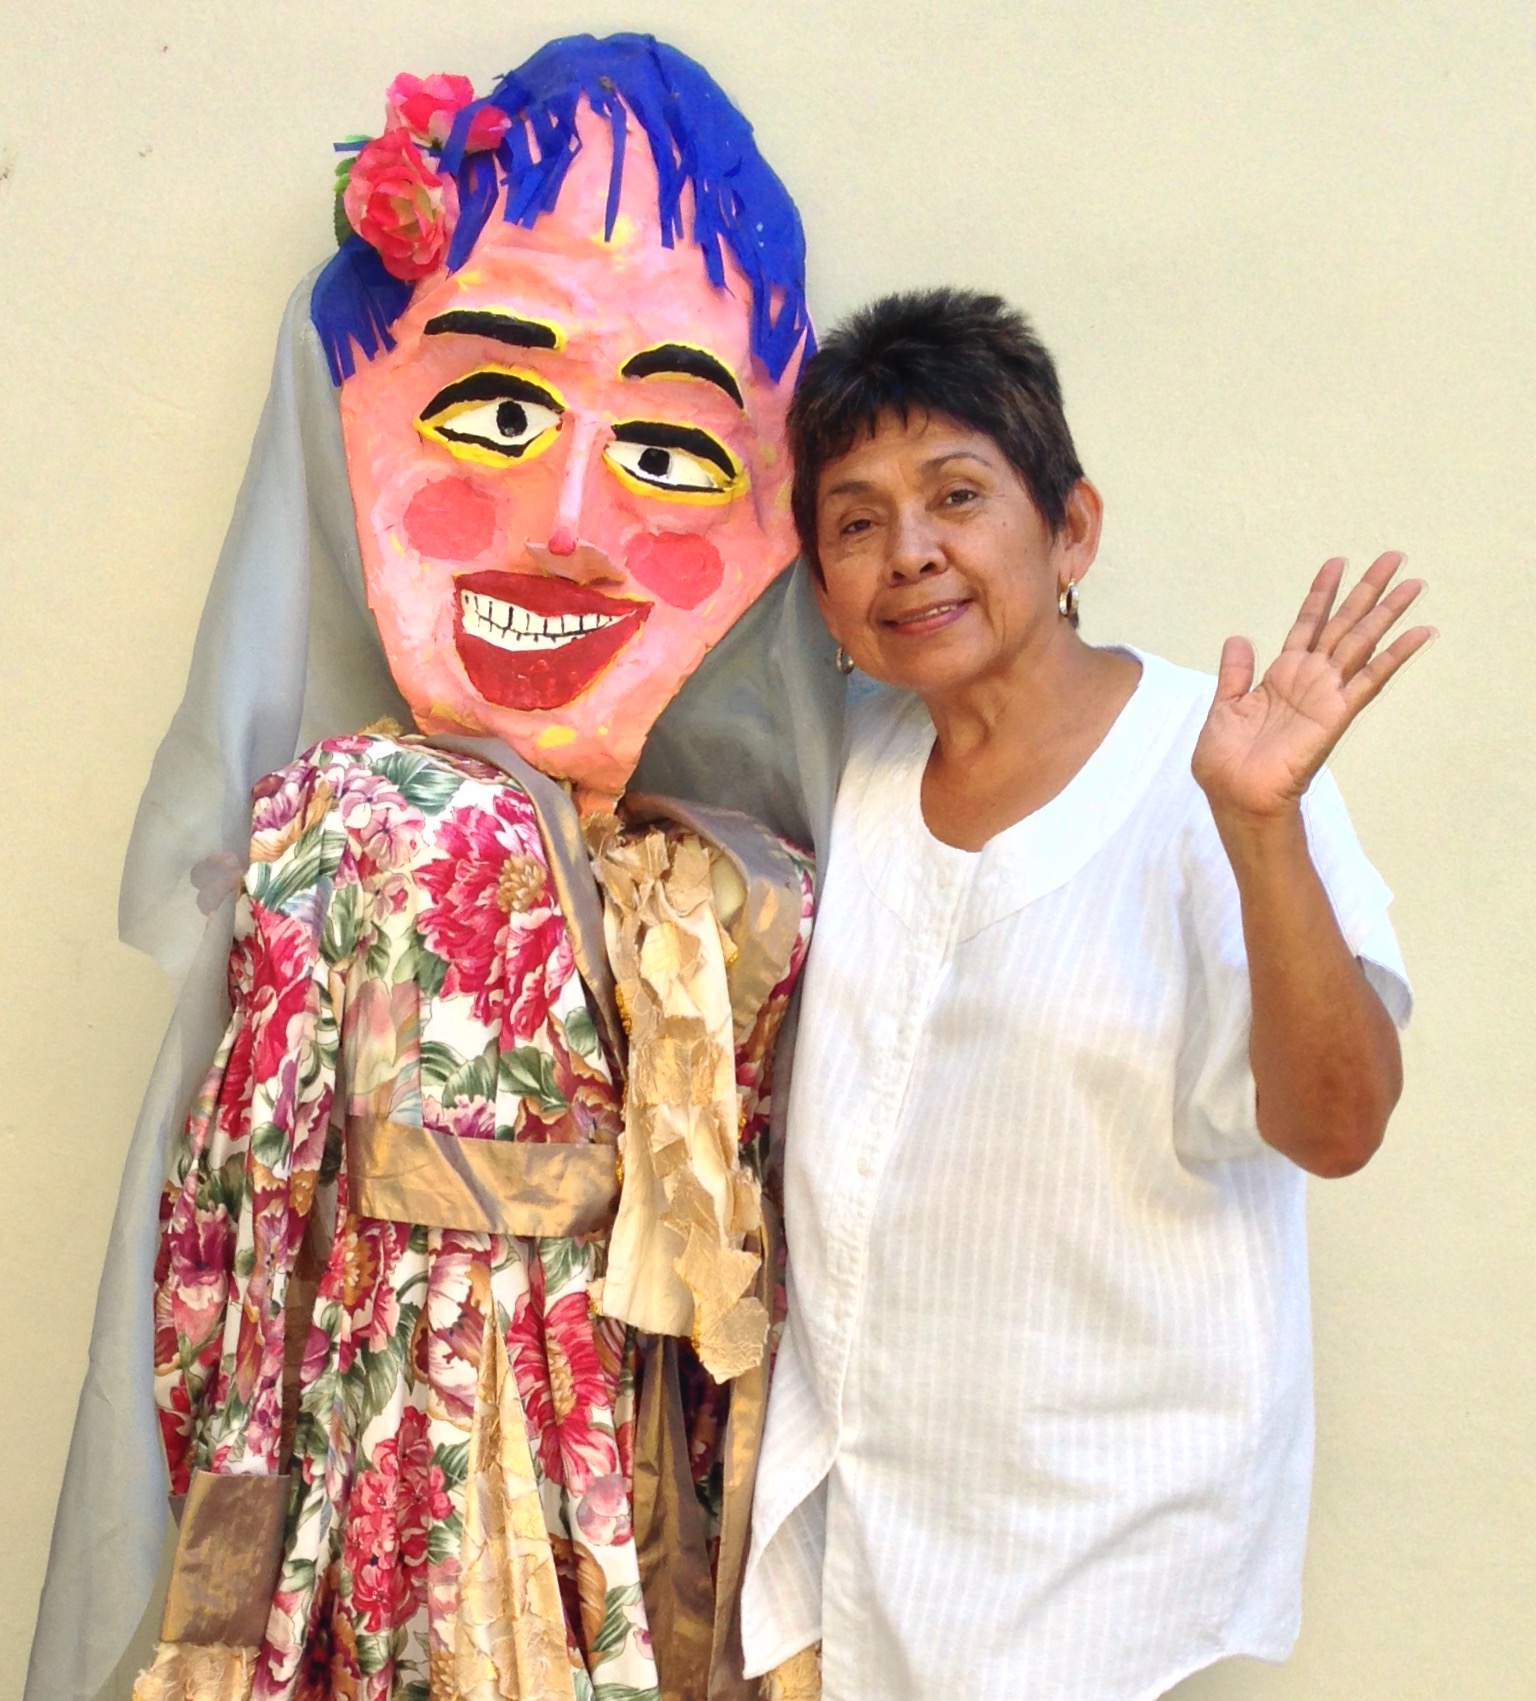 Woman with a person wearing a decorative mask